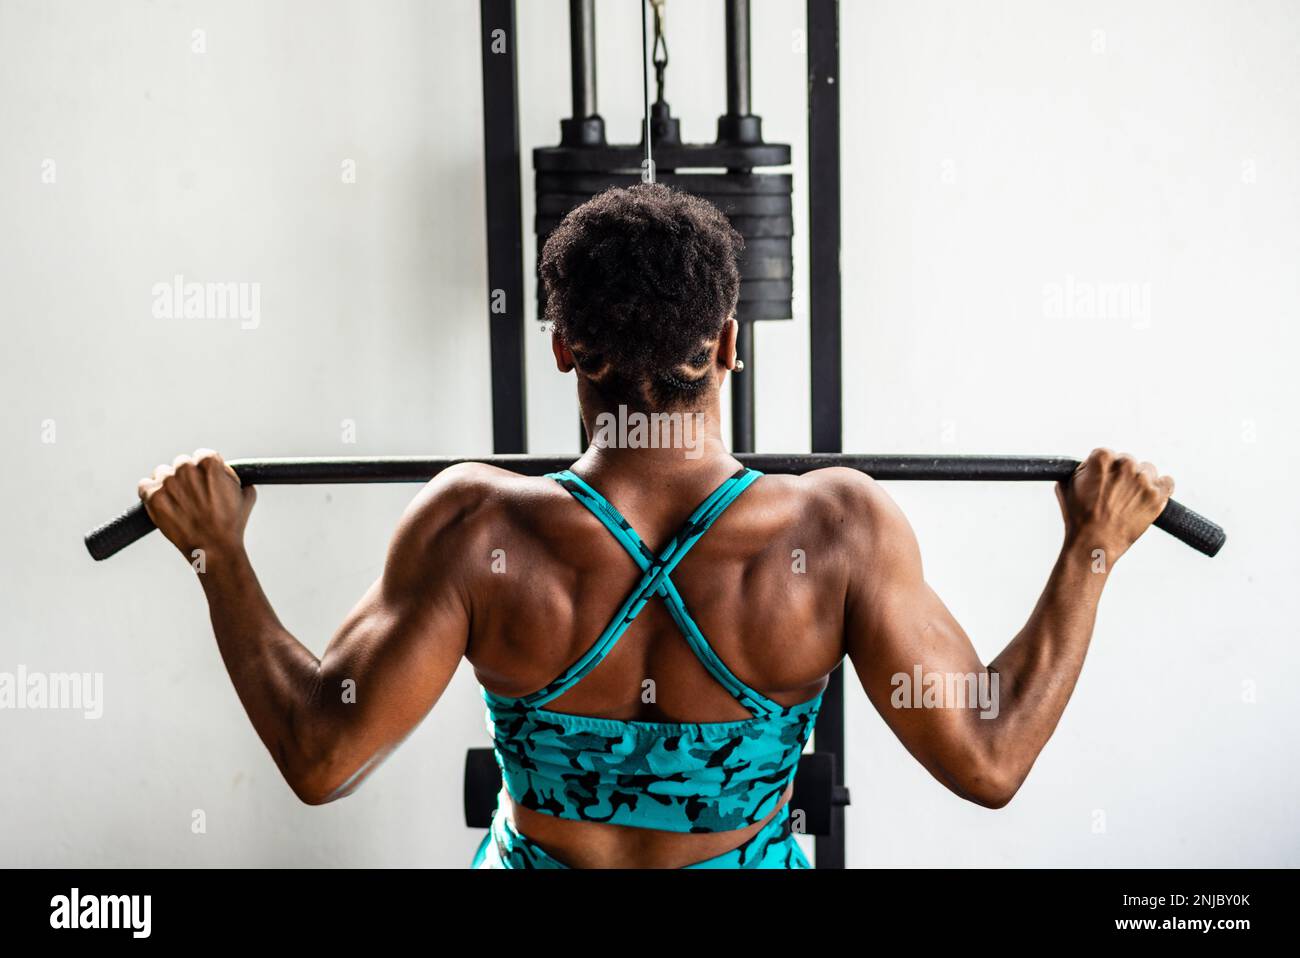 Portrait of female body fitness icon making pull ups with straight